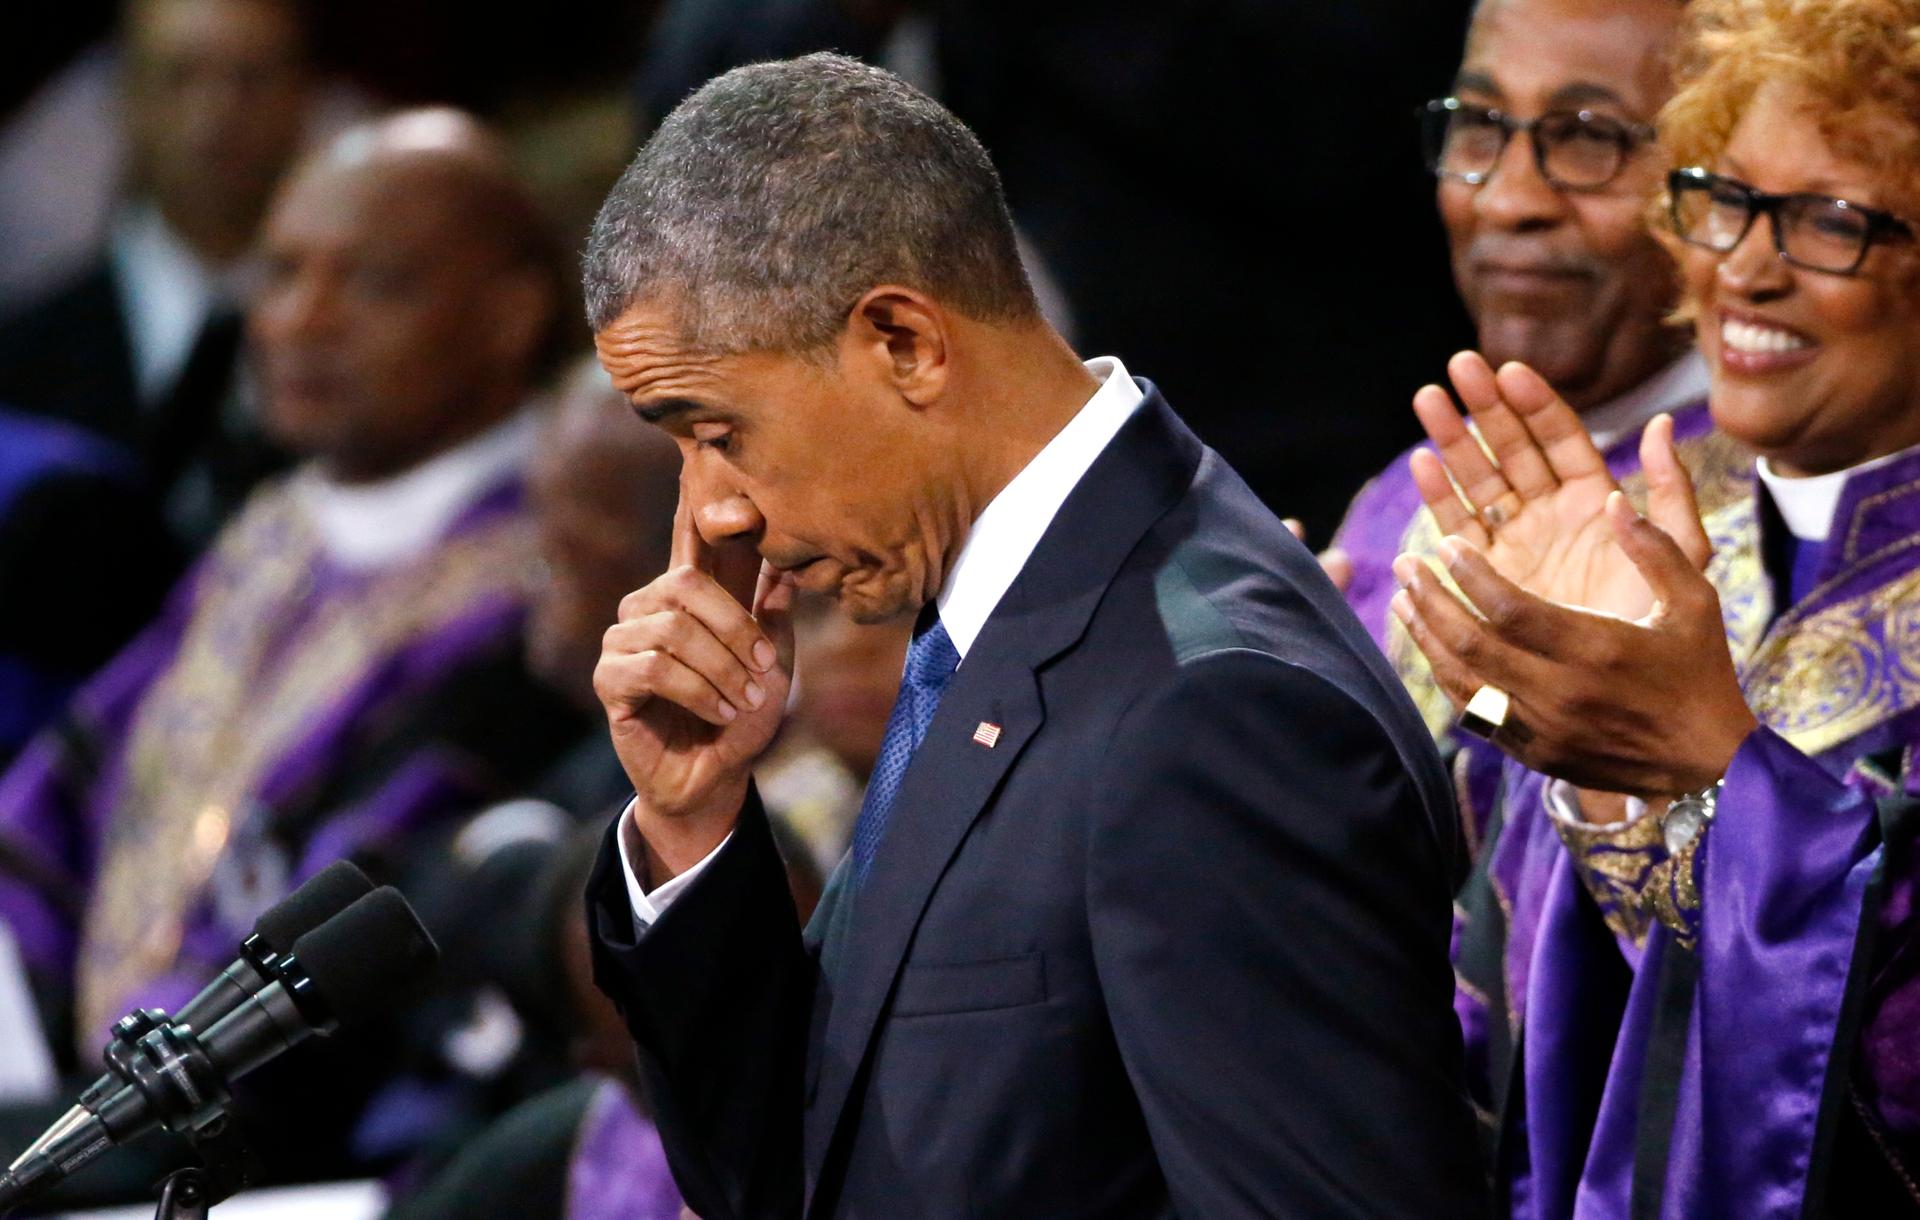 President Barack Obama pauses during his eulogy for one of the victims slain in a Charlestown, South Carolina, church by an avowed white supremacist